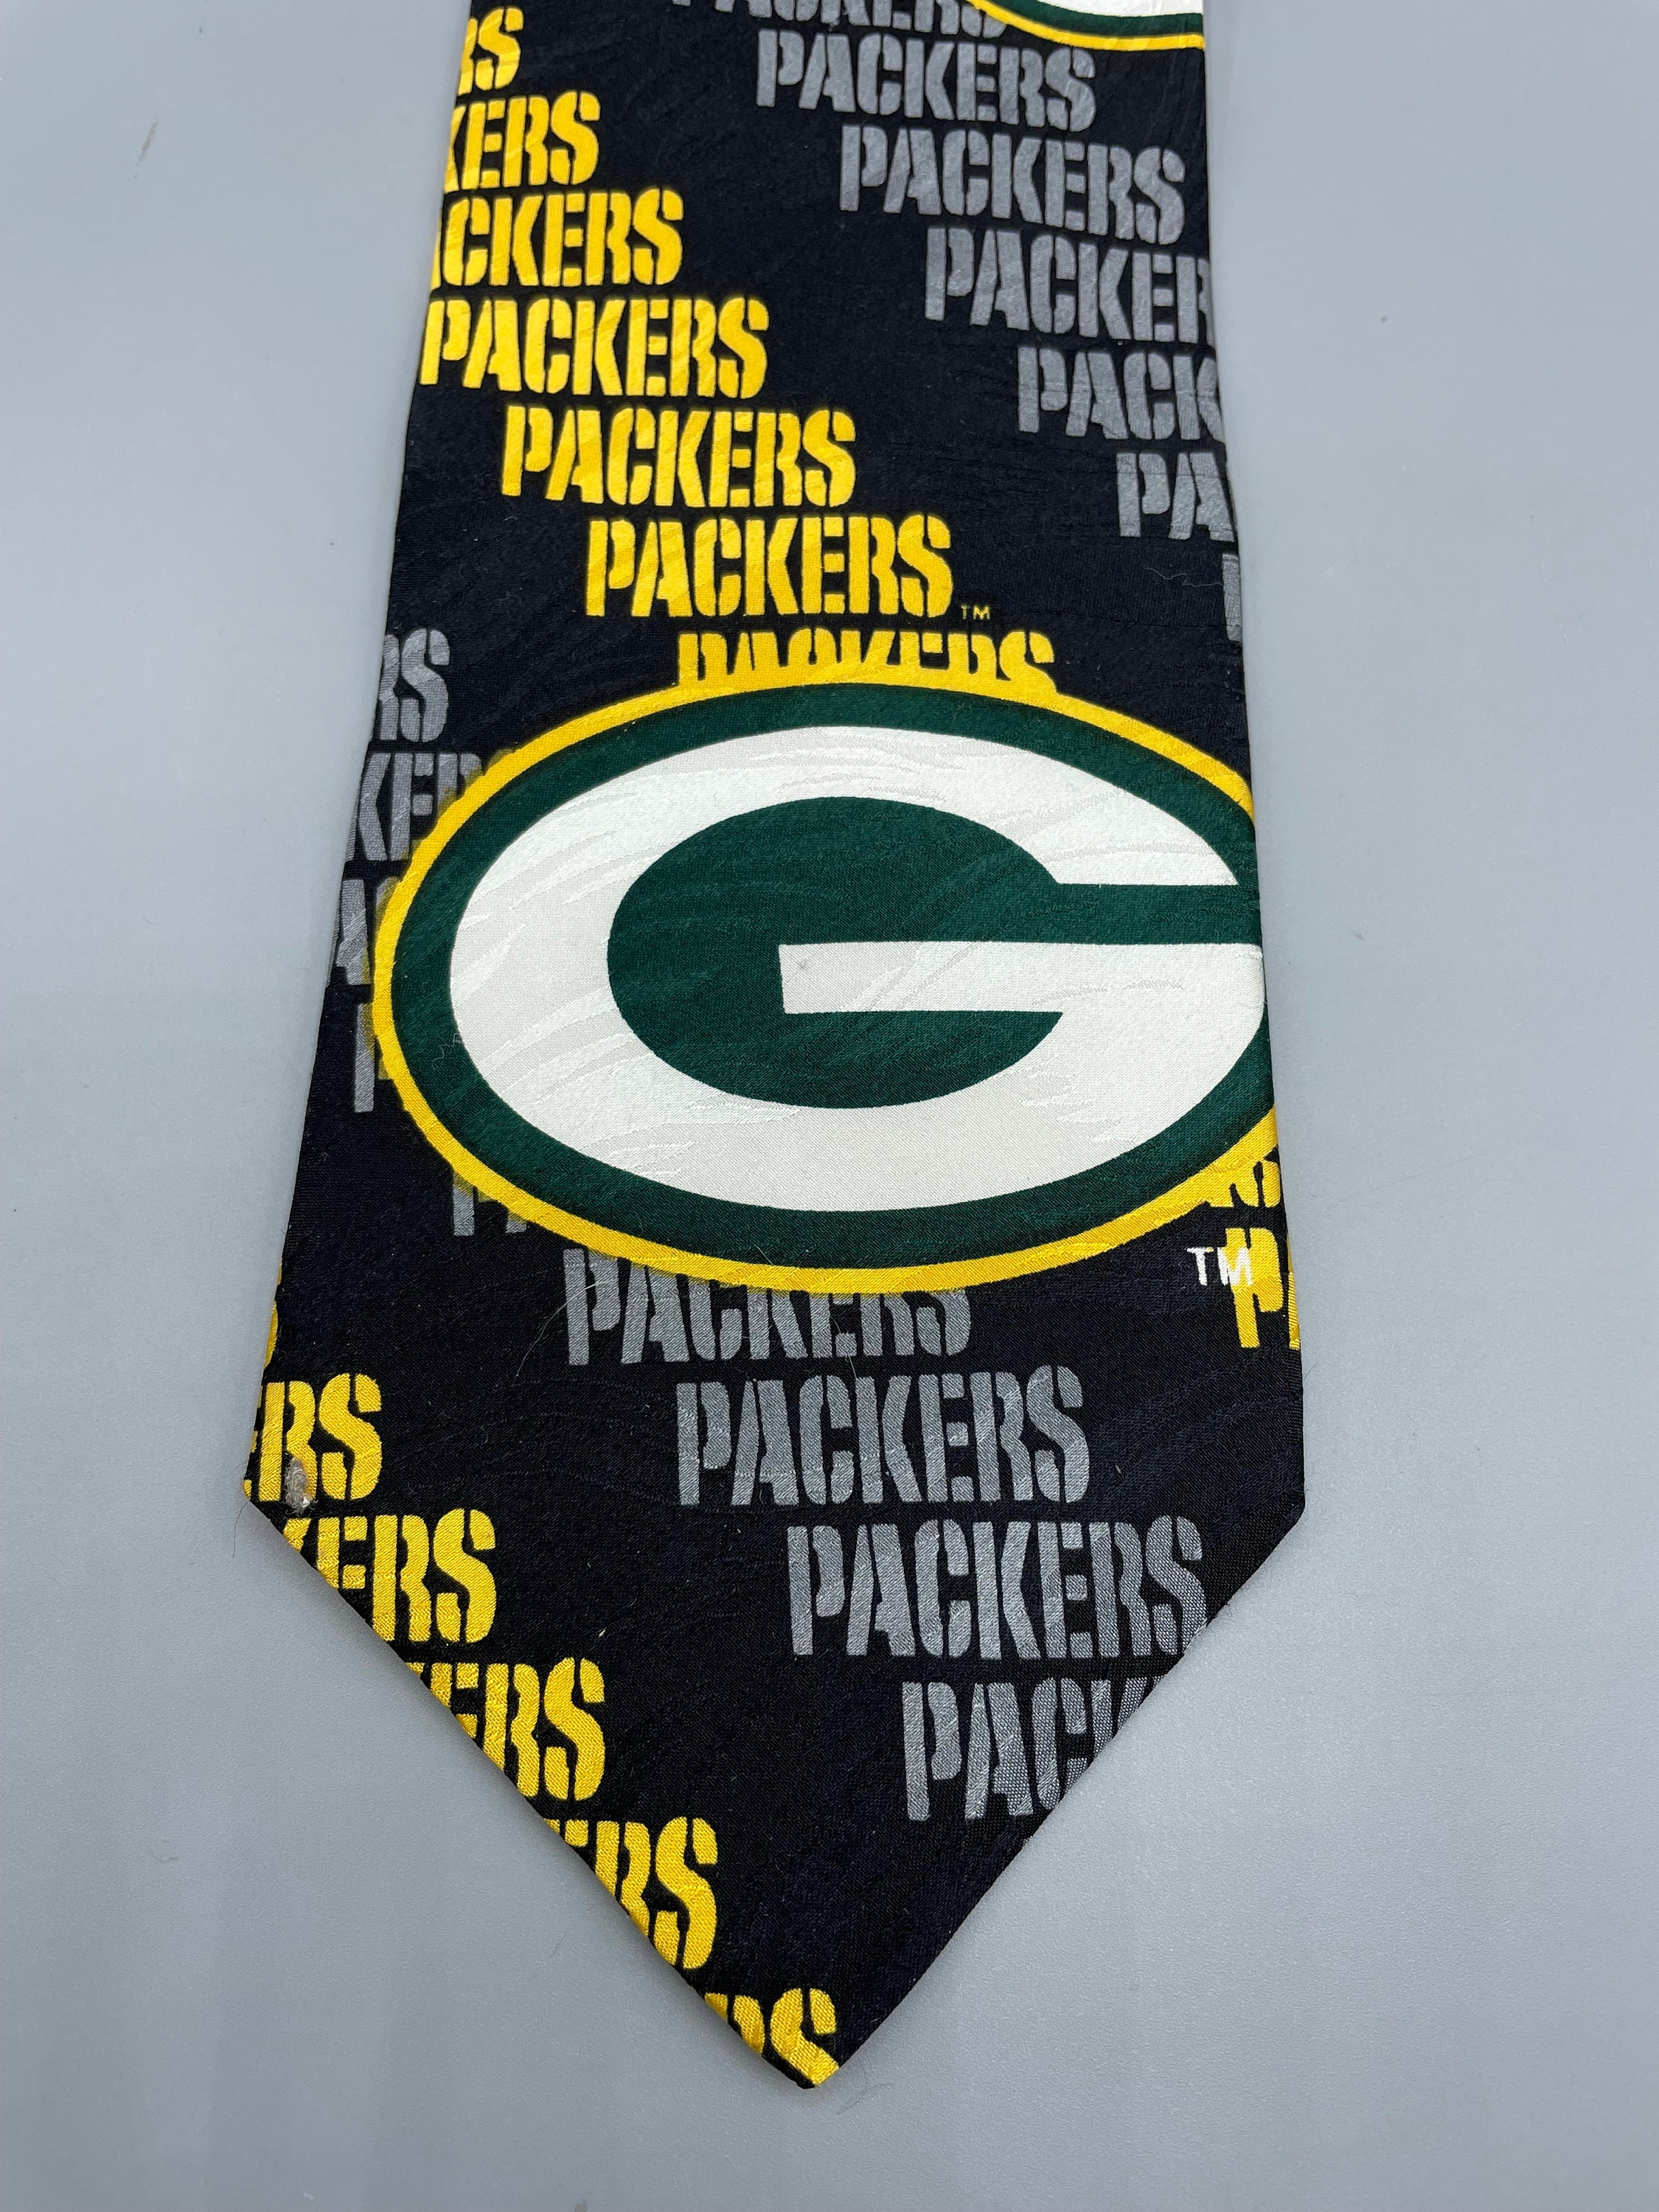 Green Bay Packers Gifts, Souvenirs, and Clothing - Packer Gear and Cheese